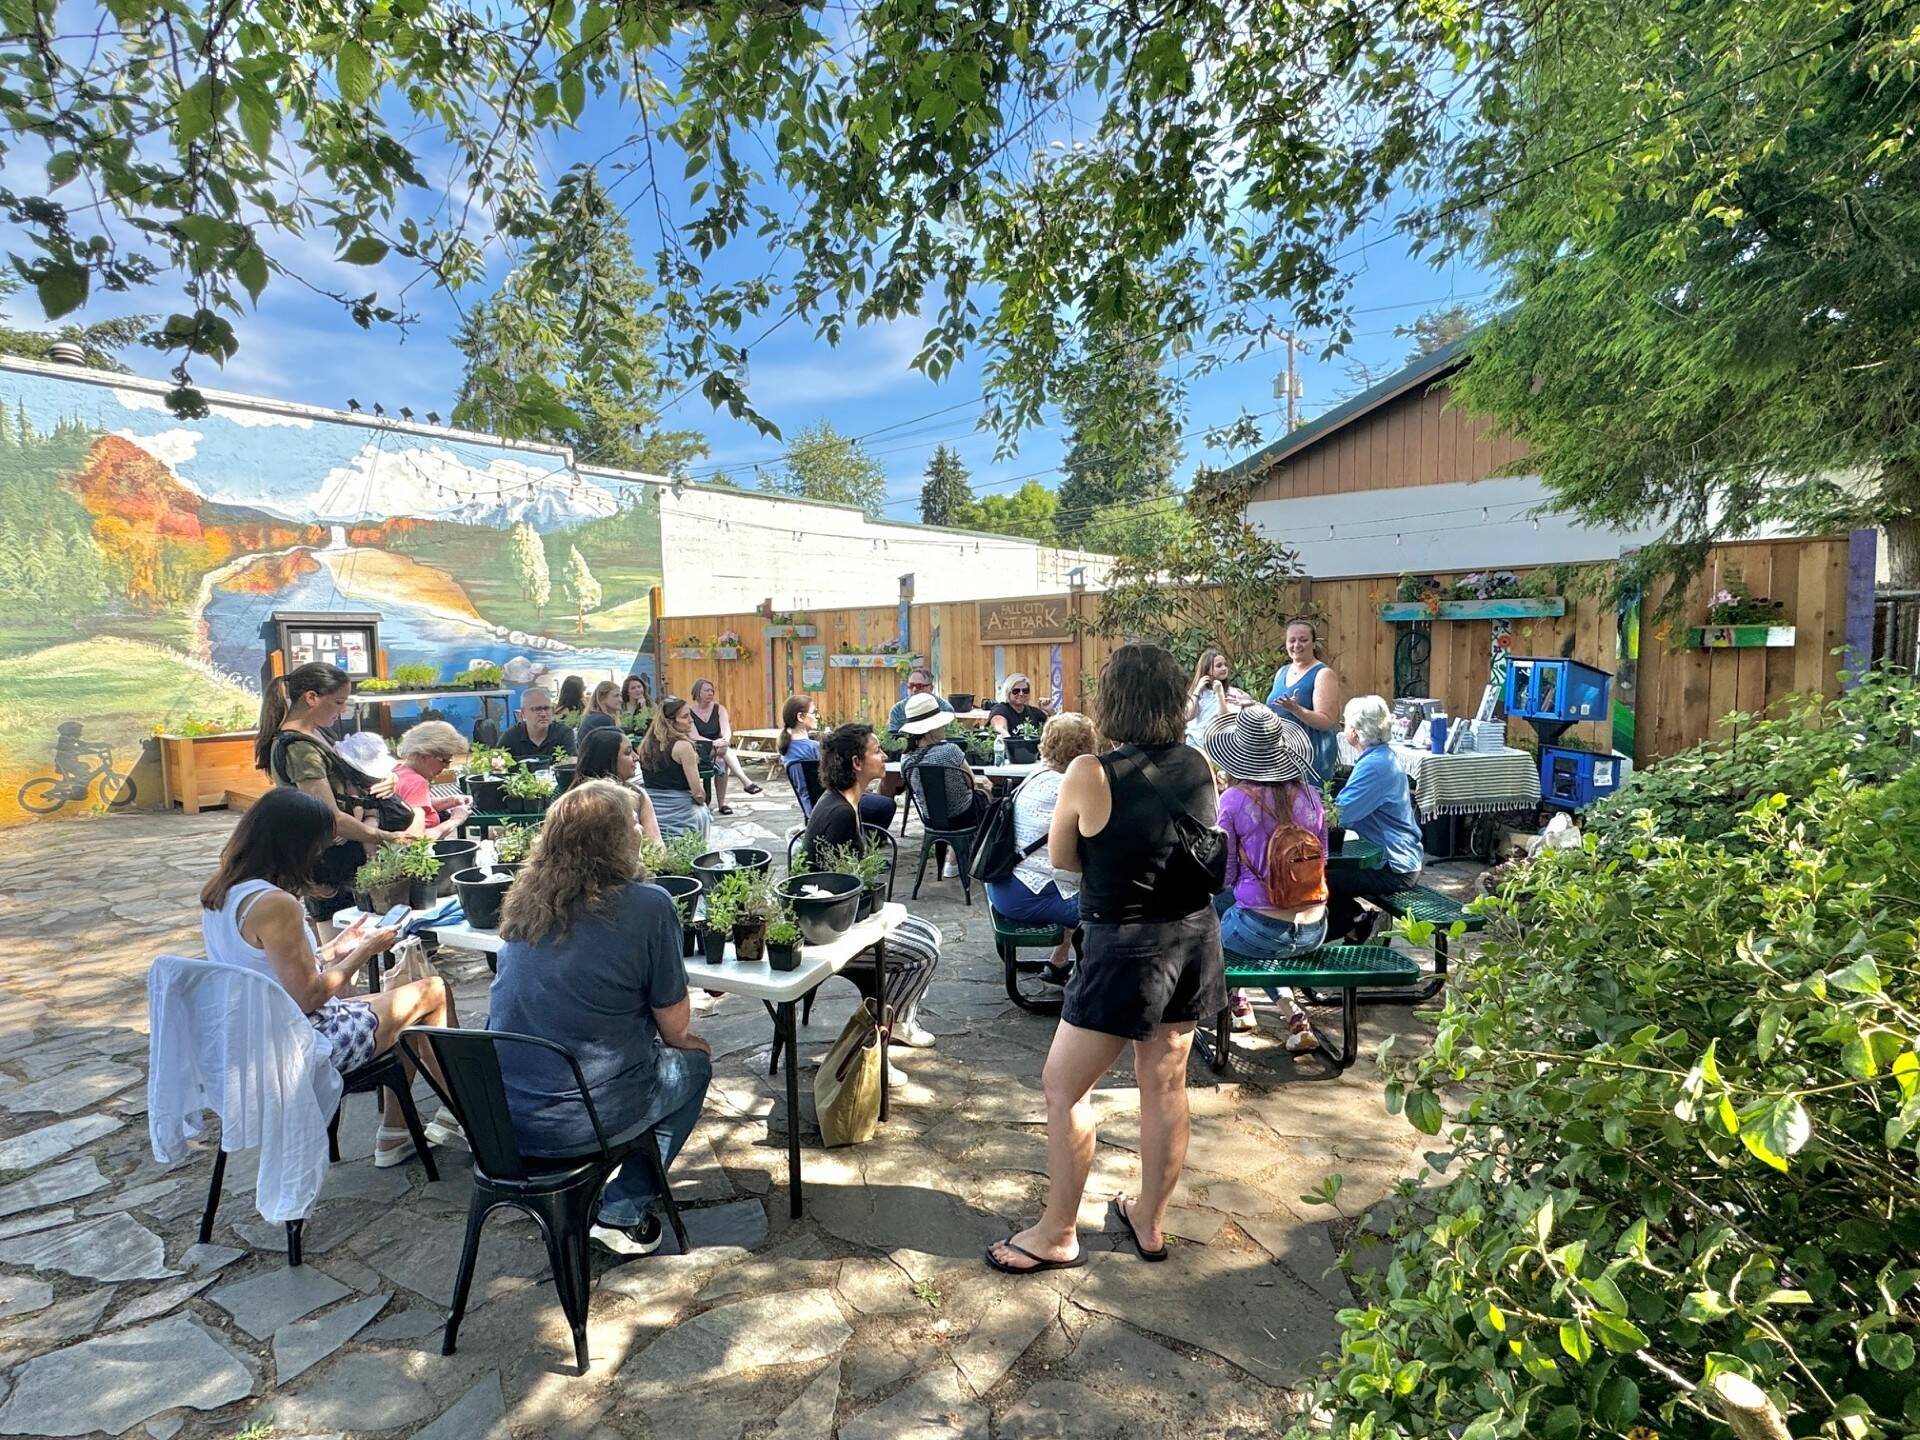 With renovations at the Fall City Art Park made possible by community efforts and donations complete, the organization held its first event, a Kitchen Herb Garden Workshop, hosted by Cedar House Living on June 21. Photo courtesy of Fall City Arts